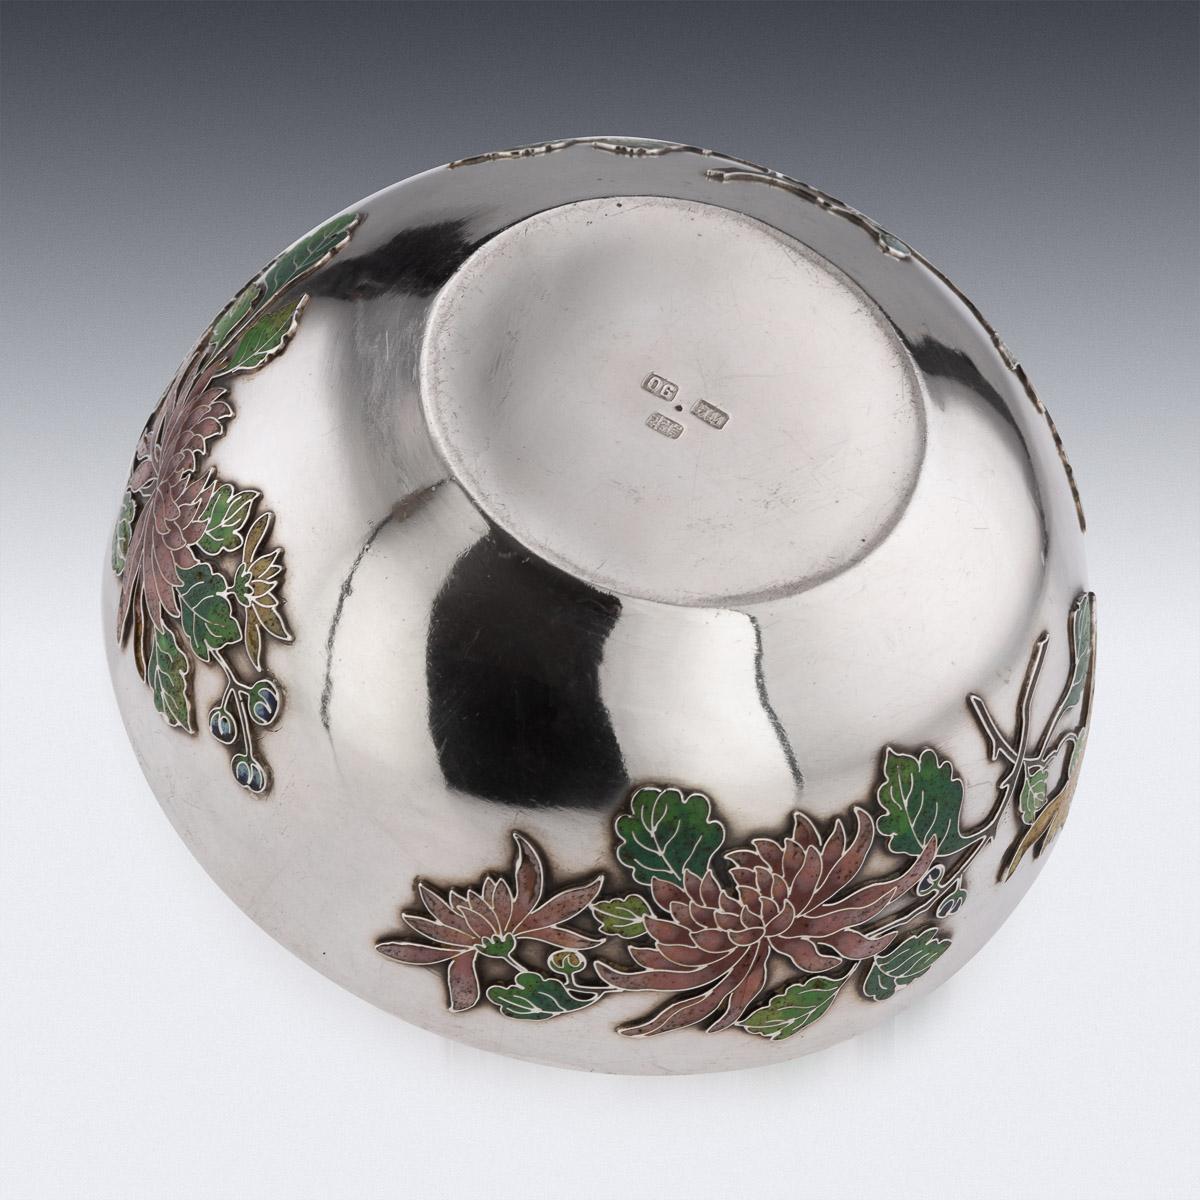 19th Century Rare Chinese Export Solid Silver & Enamel Bowl, Wang Hing, c.1890 For Sale 3